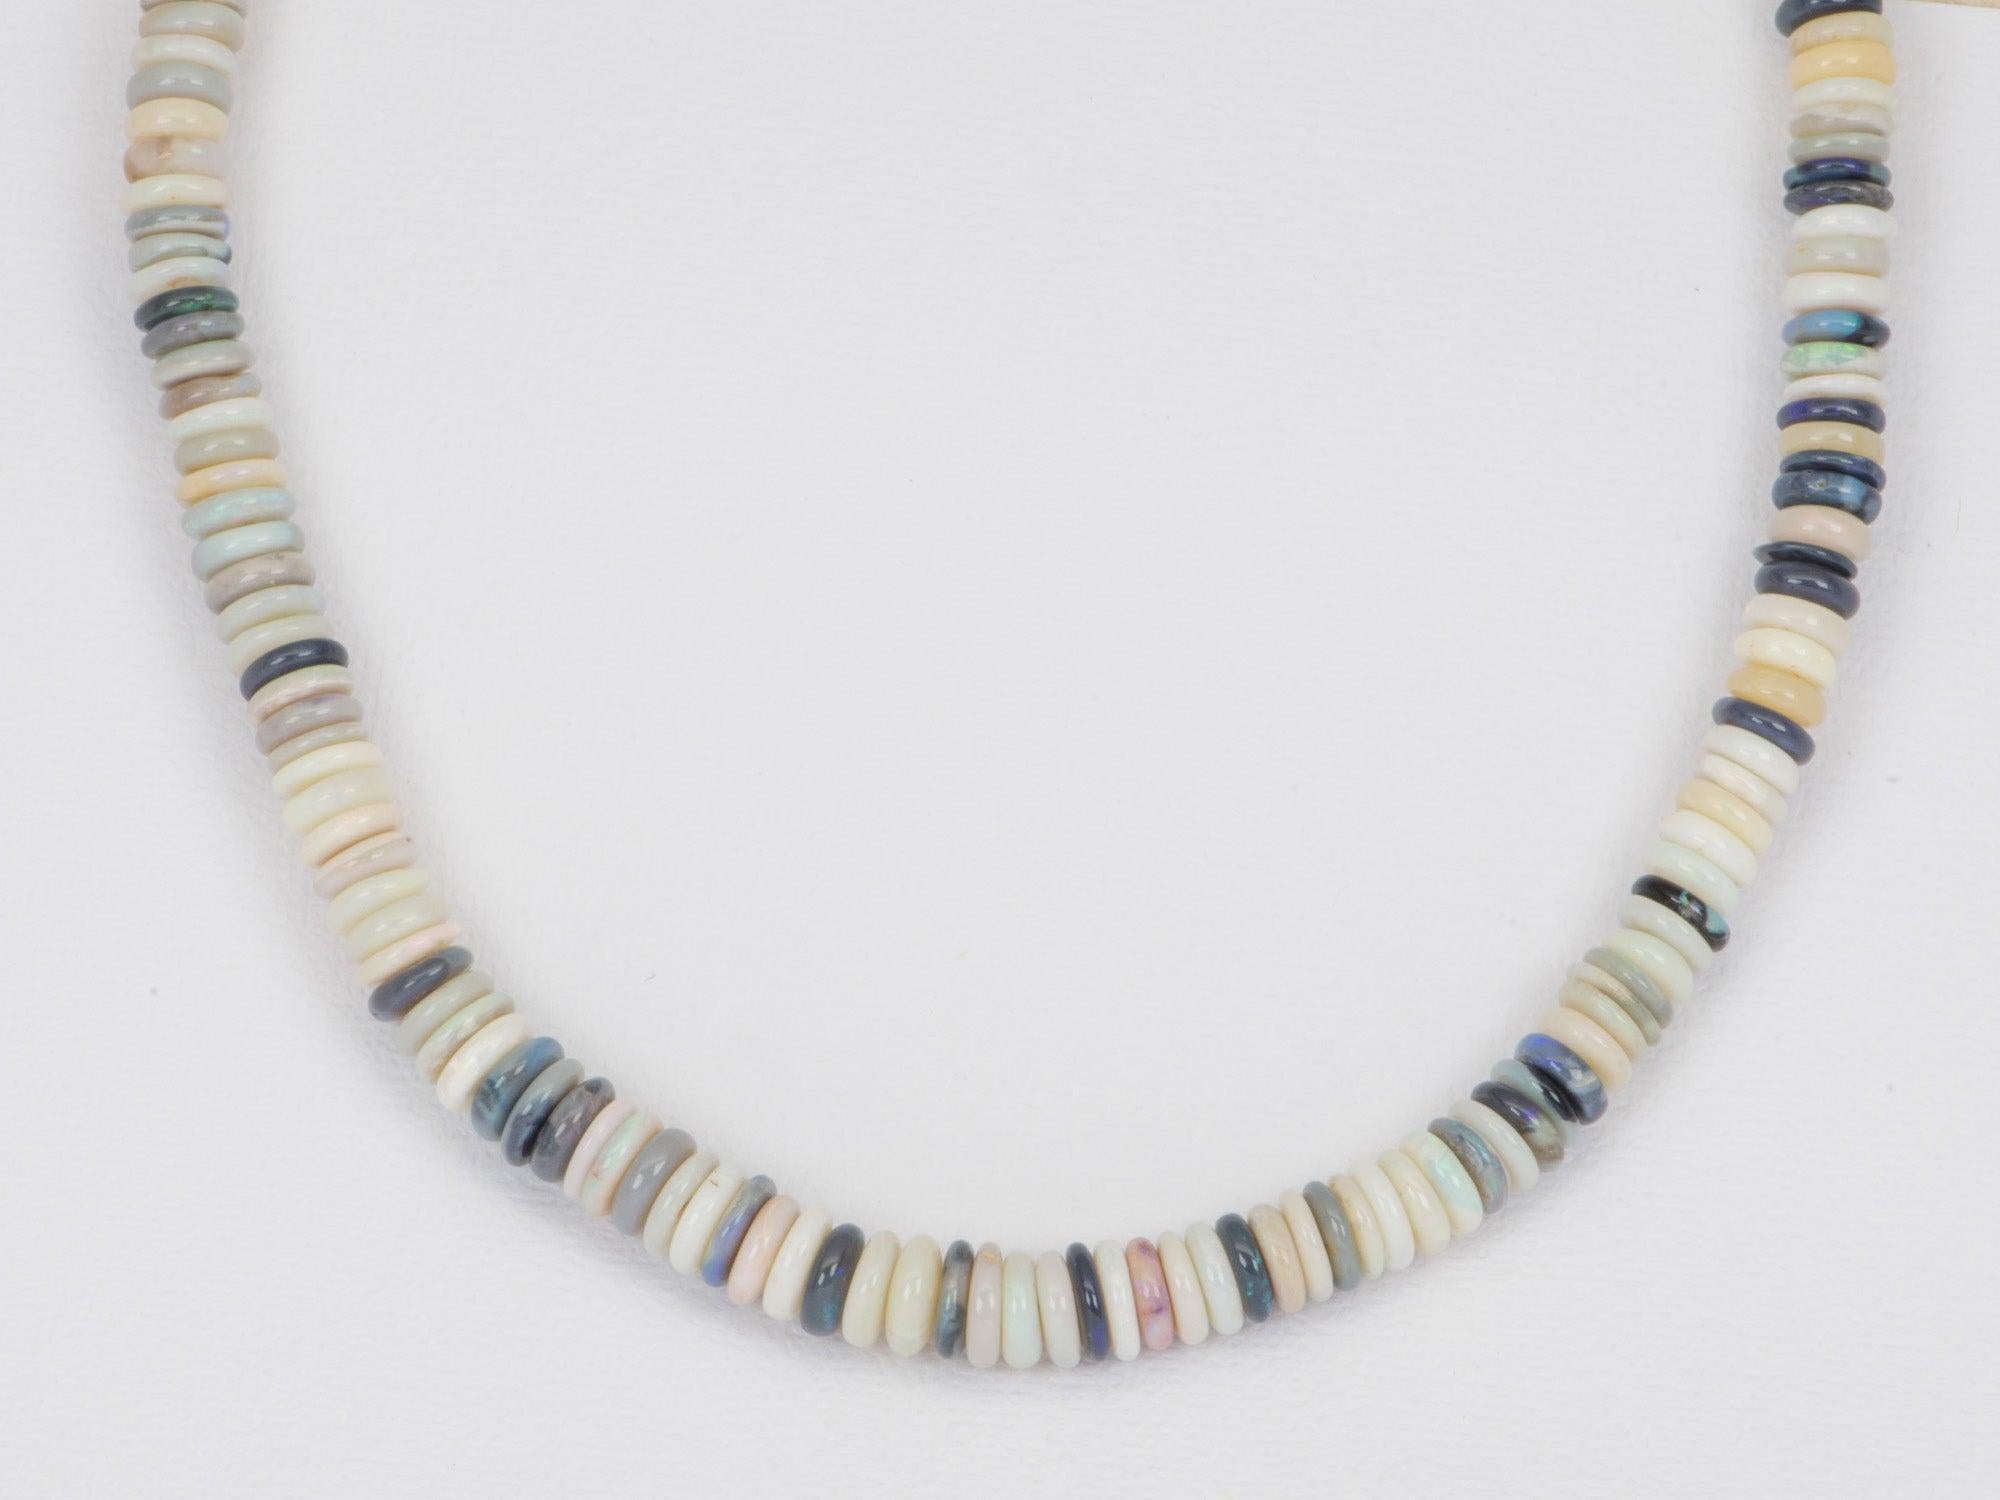 ♥ Solid Australian crystal and black Opal Heishi bead necklace with a 14k yellow gold sailor clasp
♥ The necklace measures 17